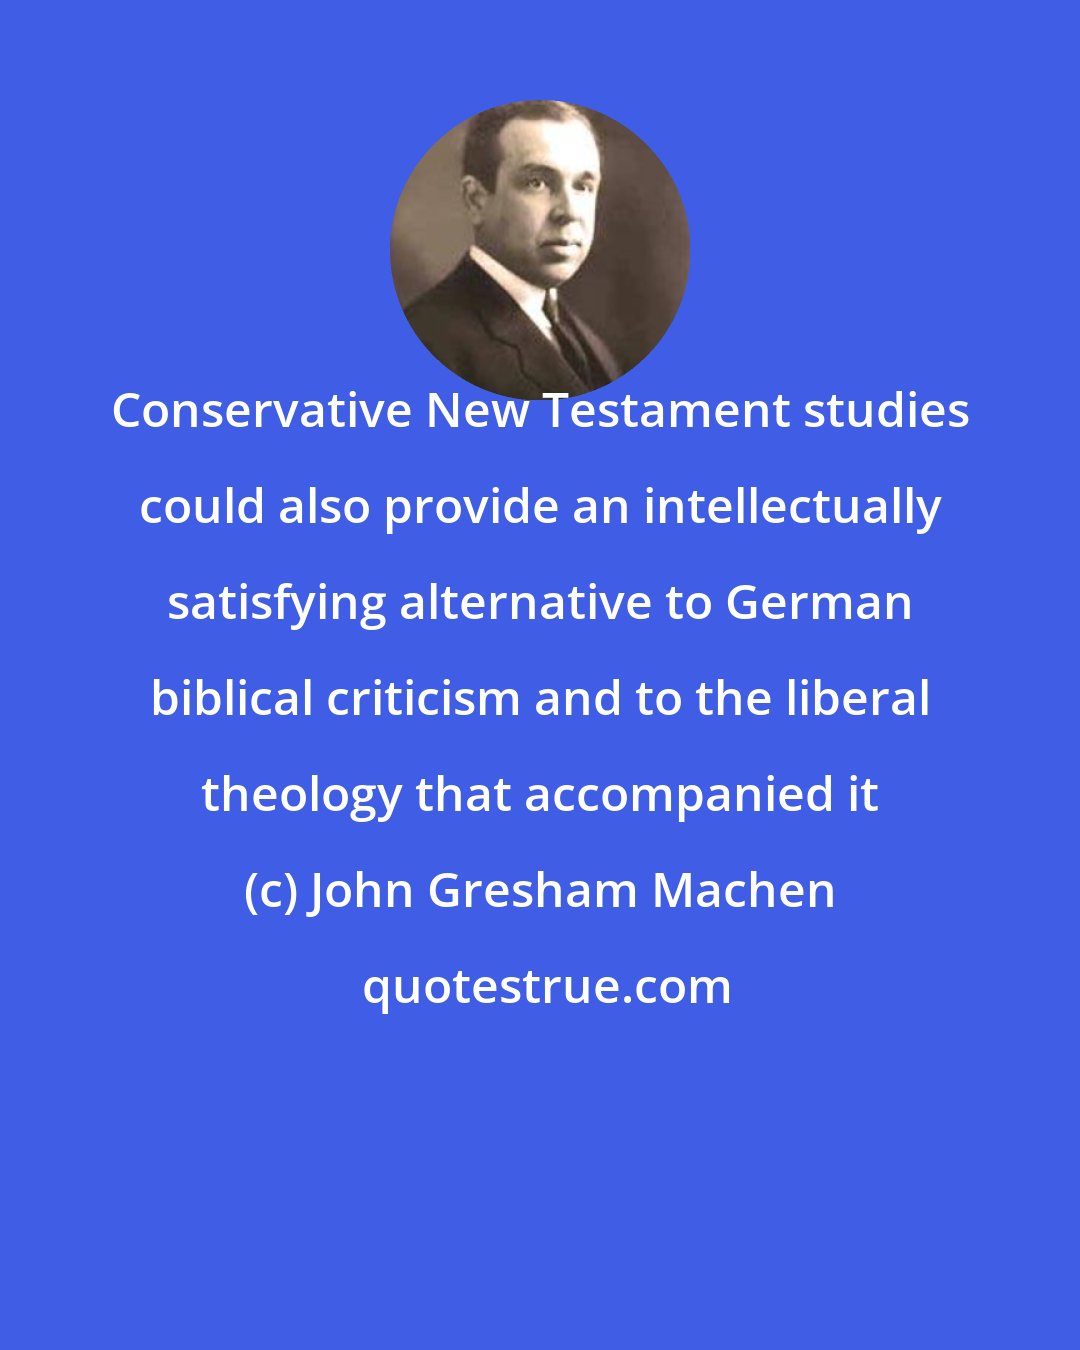 John Gresham Machen: Conservative New Testament studies could also provide an intellectually satisfying alternative to German biblical criticism and to the liberal theology that accompanied it